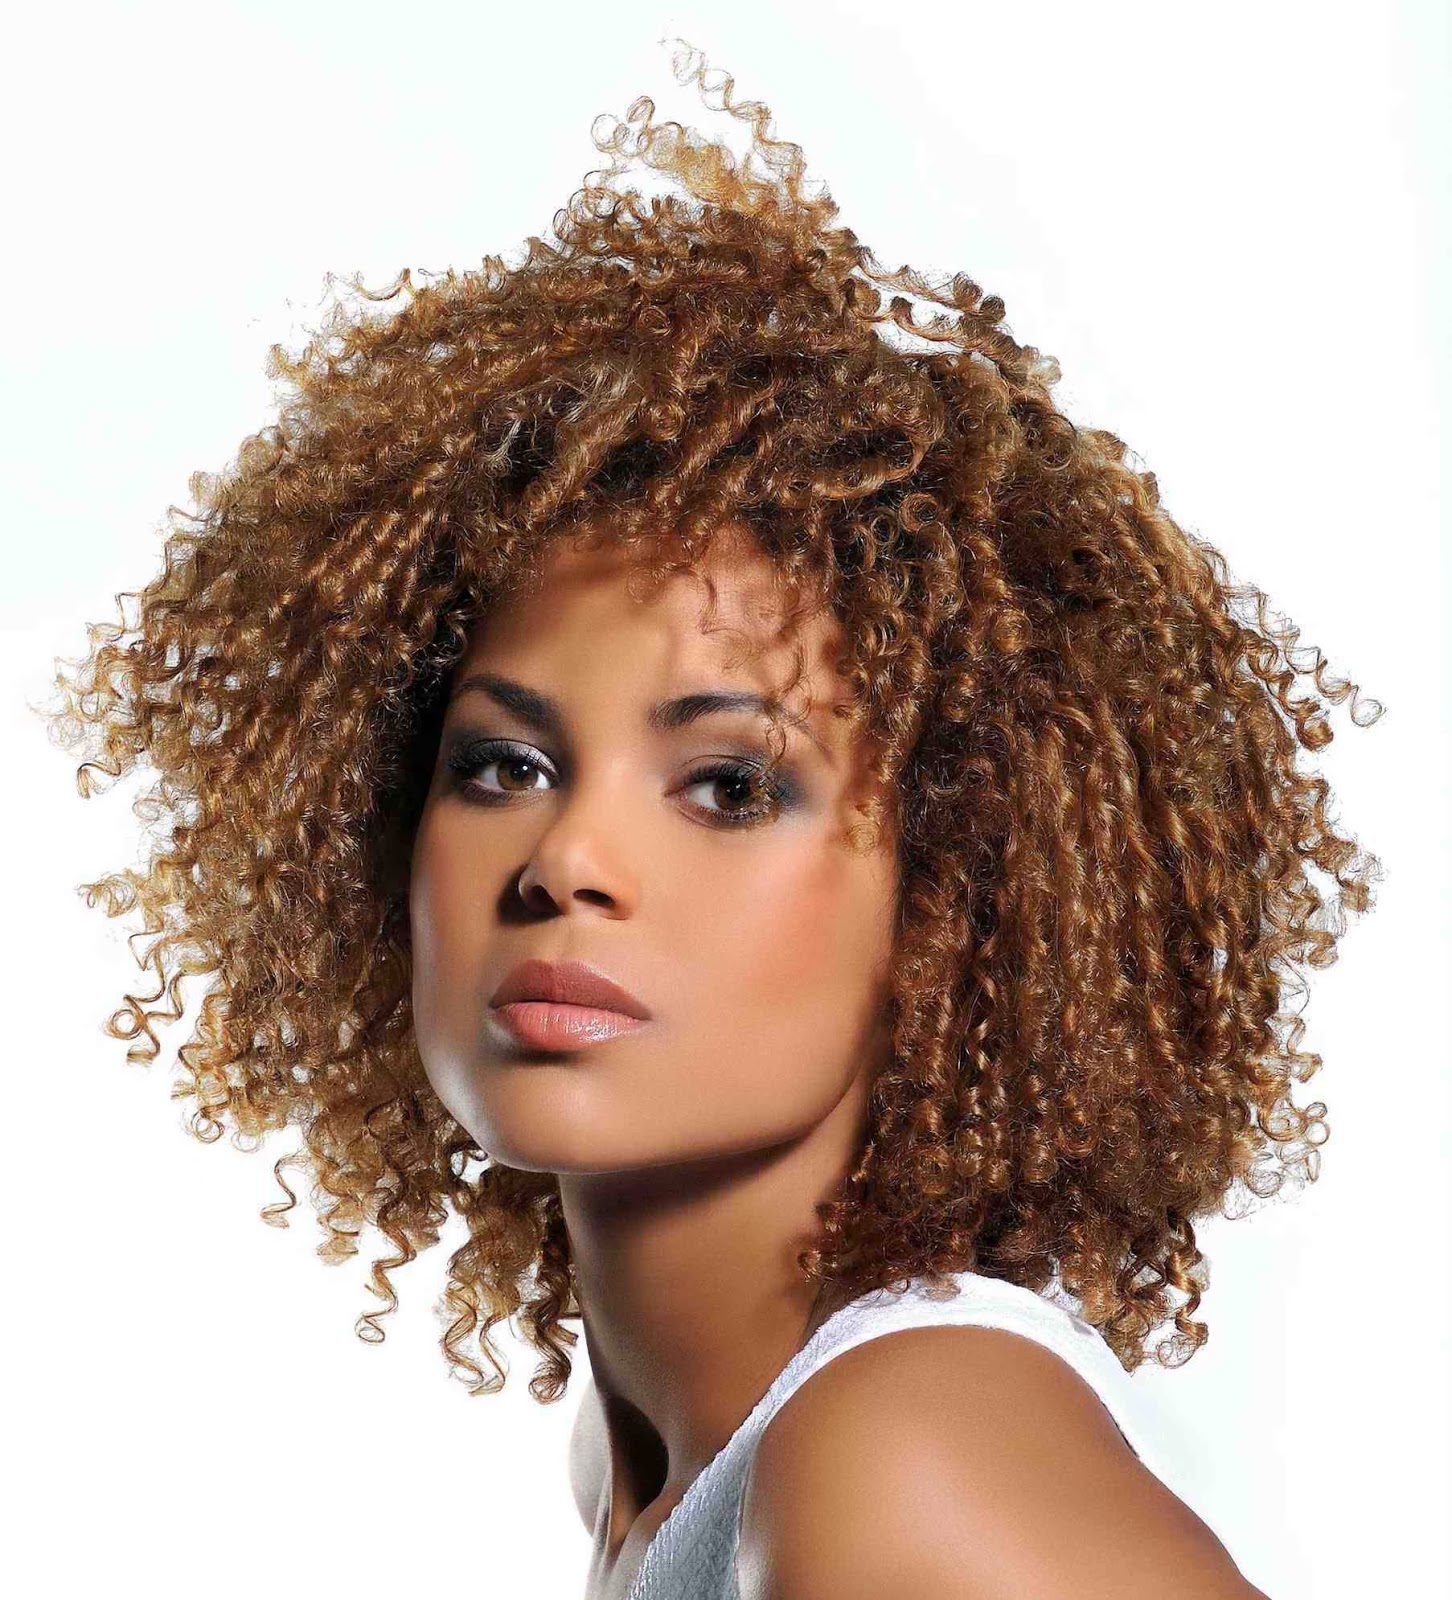 Short Curly Hairstyles For Black Women 02 AM kamu Labels: curly hair styles